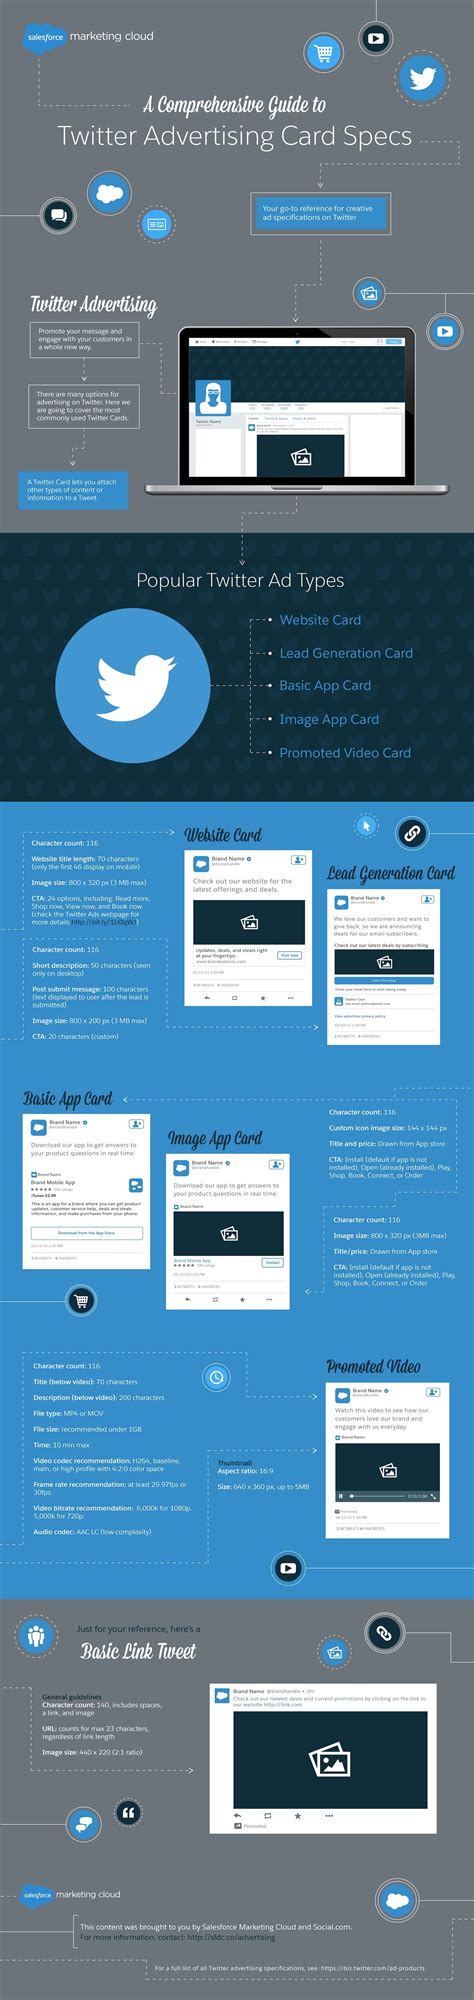 twitter ads infographic socialtimes a guide to twitter advertising card